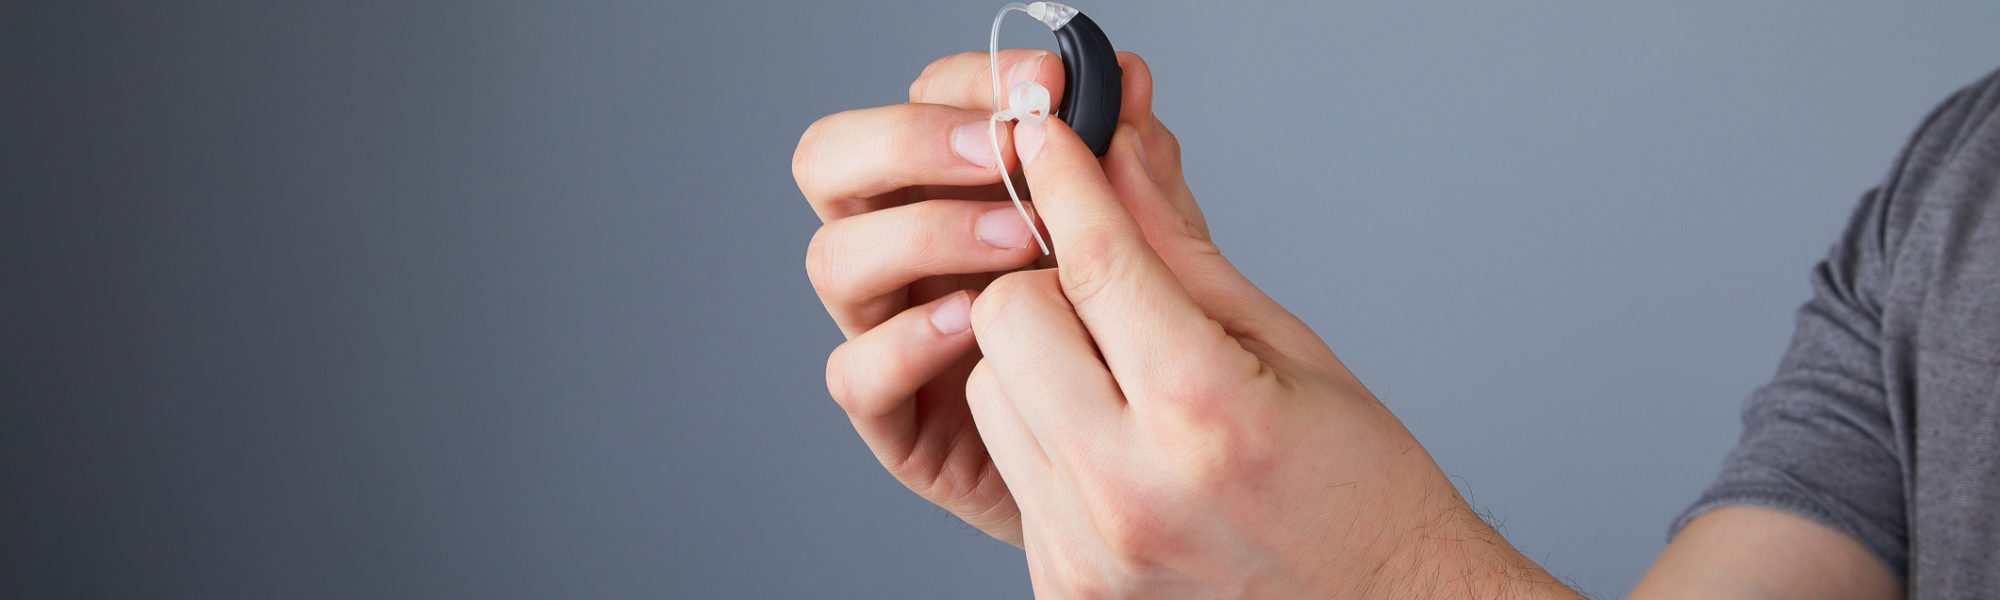 holding small black hearing aid